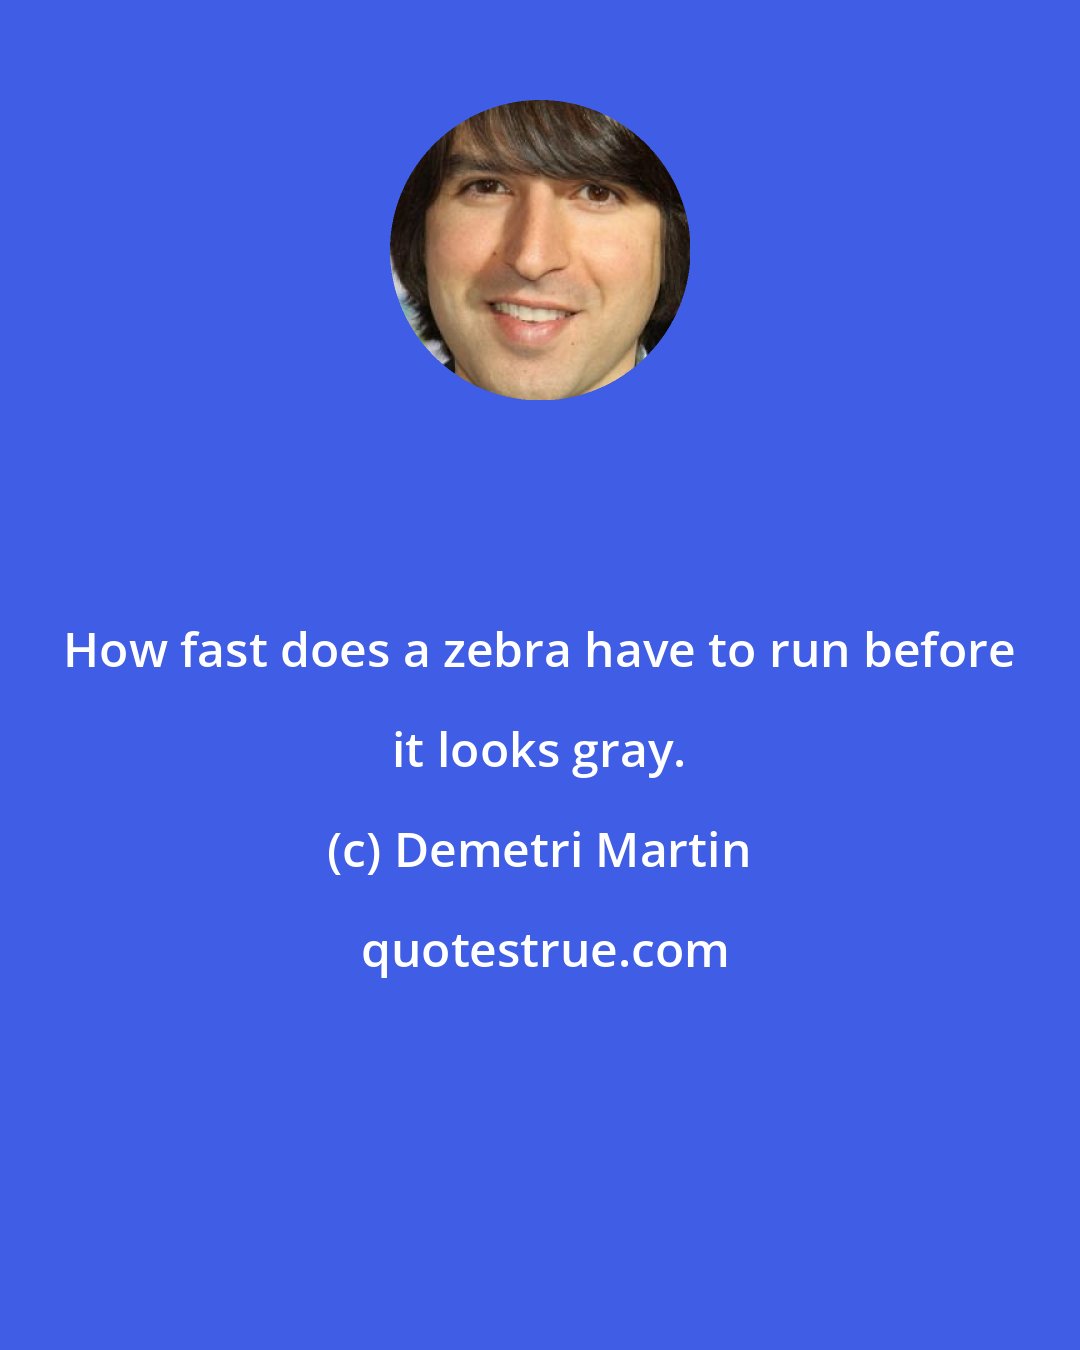 Demetri Martin: How fast does a zebra have to run before it looks gray.